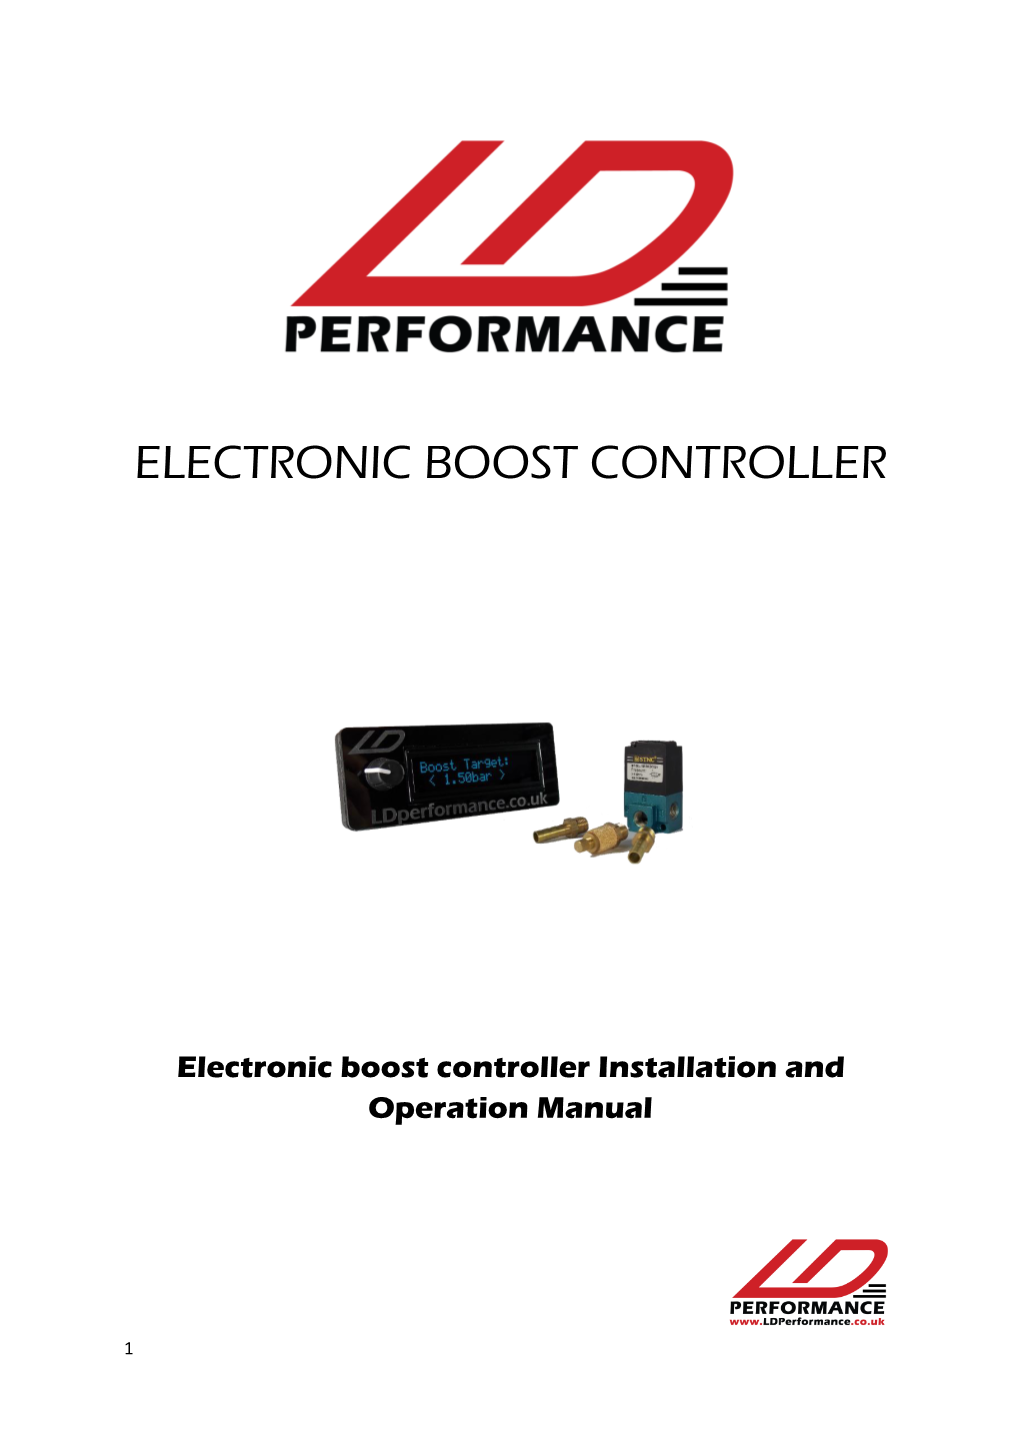 Electronic Boost Controller